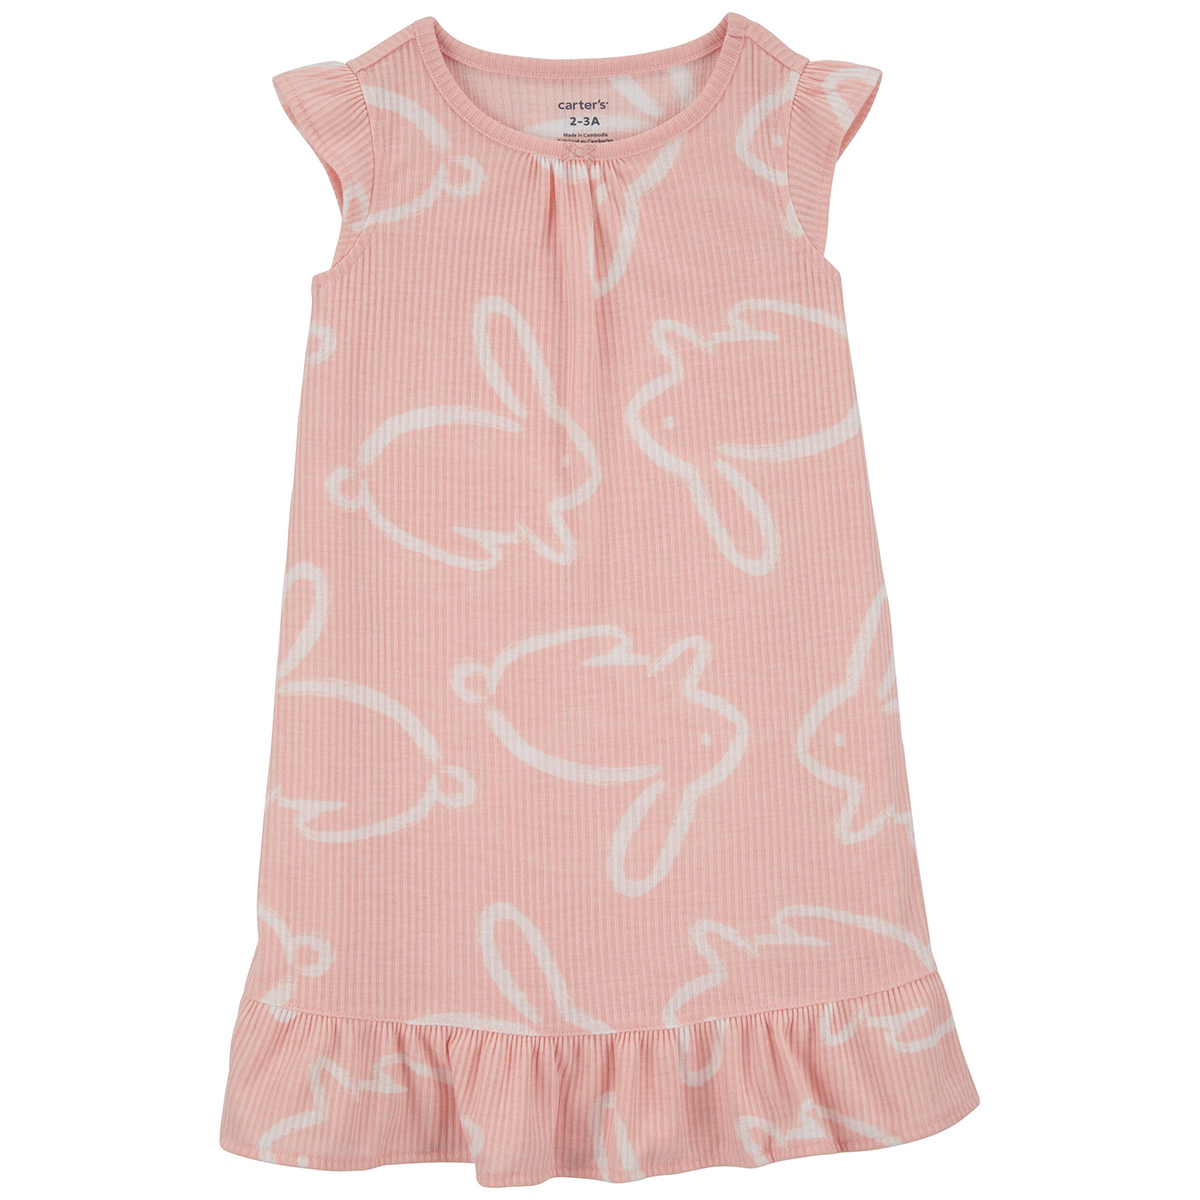 Girls Carter's(R) Pink Bunny Nightgown